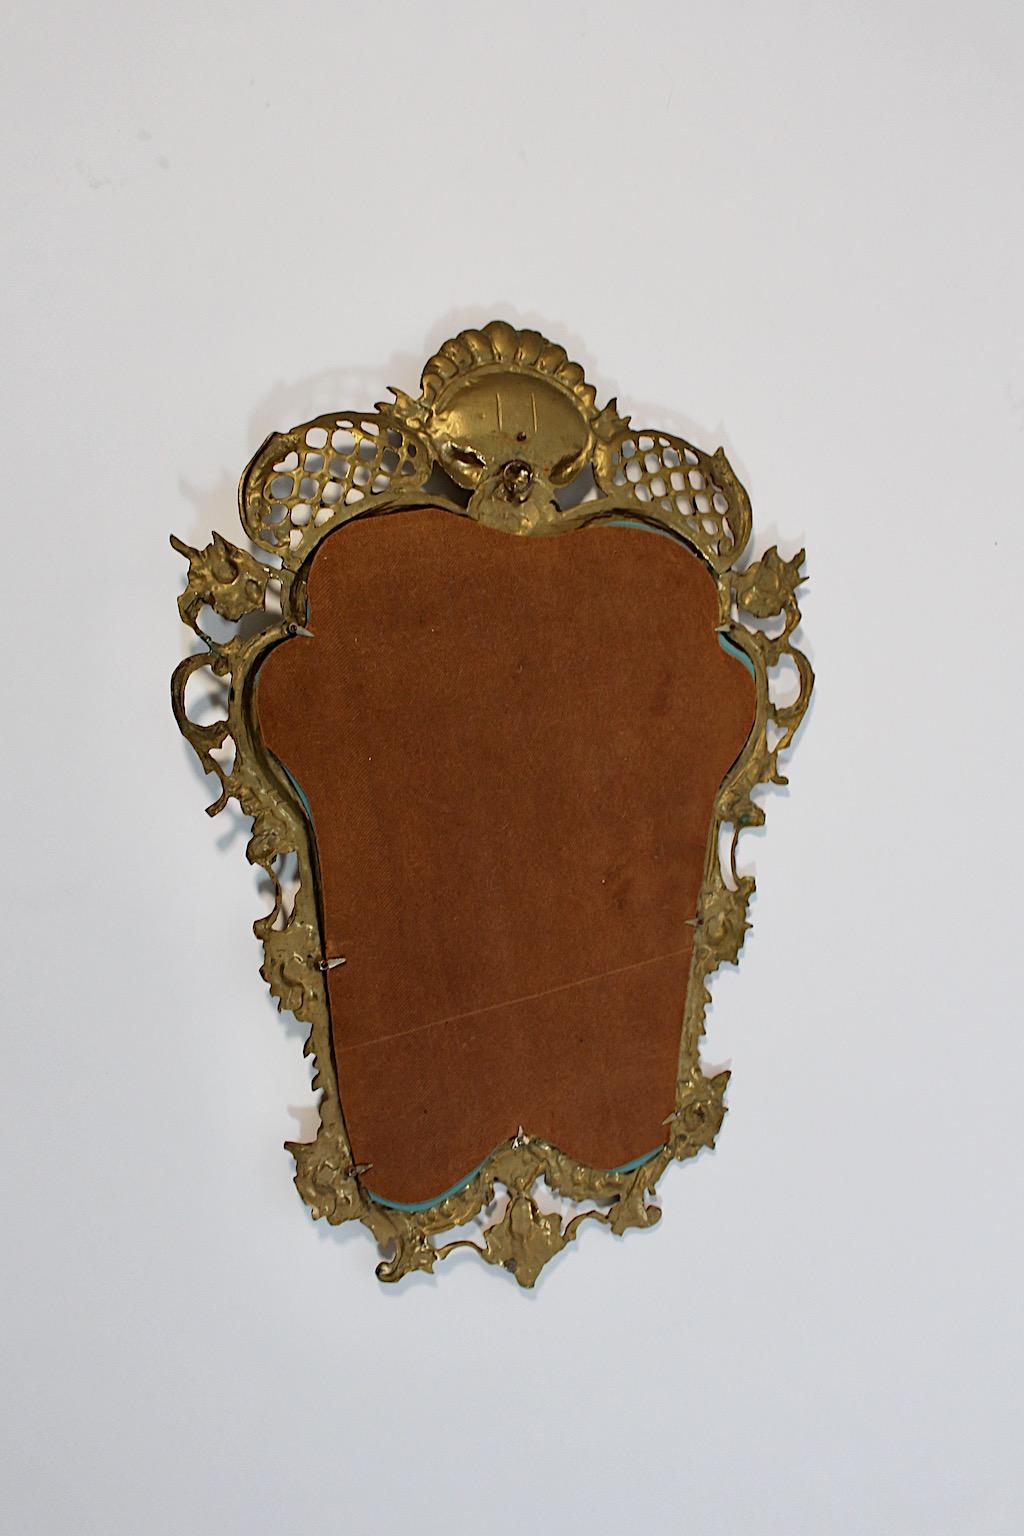 Modern Vintage Brass Wall Mirror Style Baroque Revival Italy 1970s For Sale 11